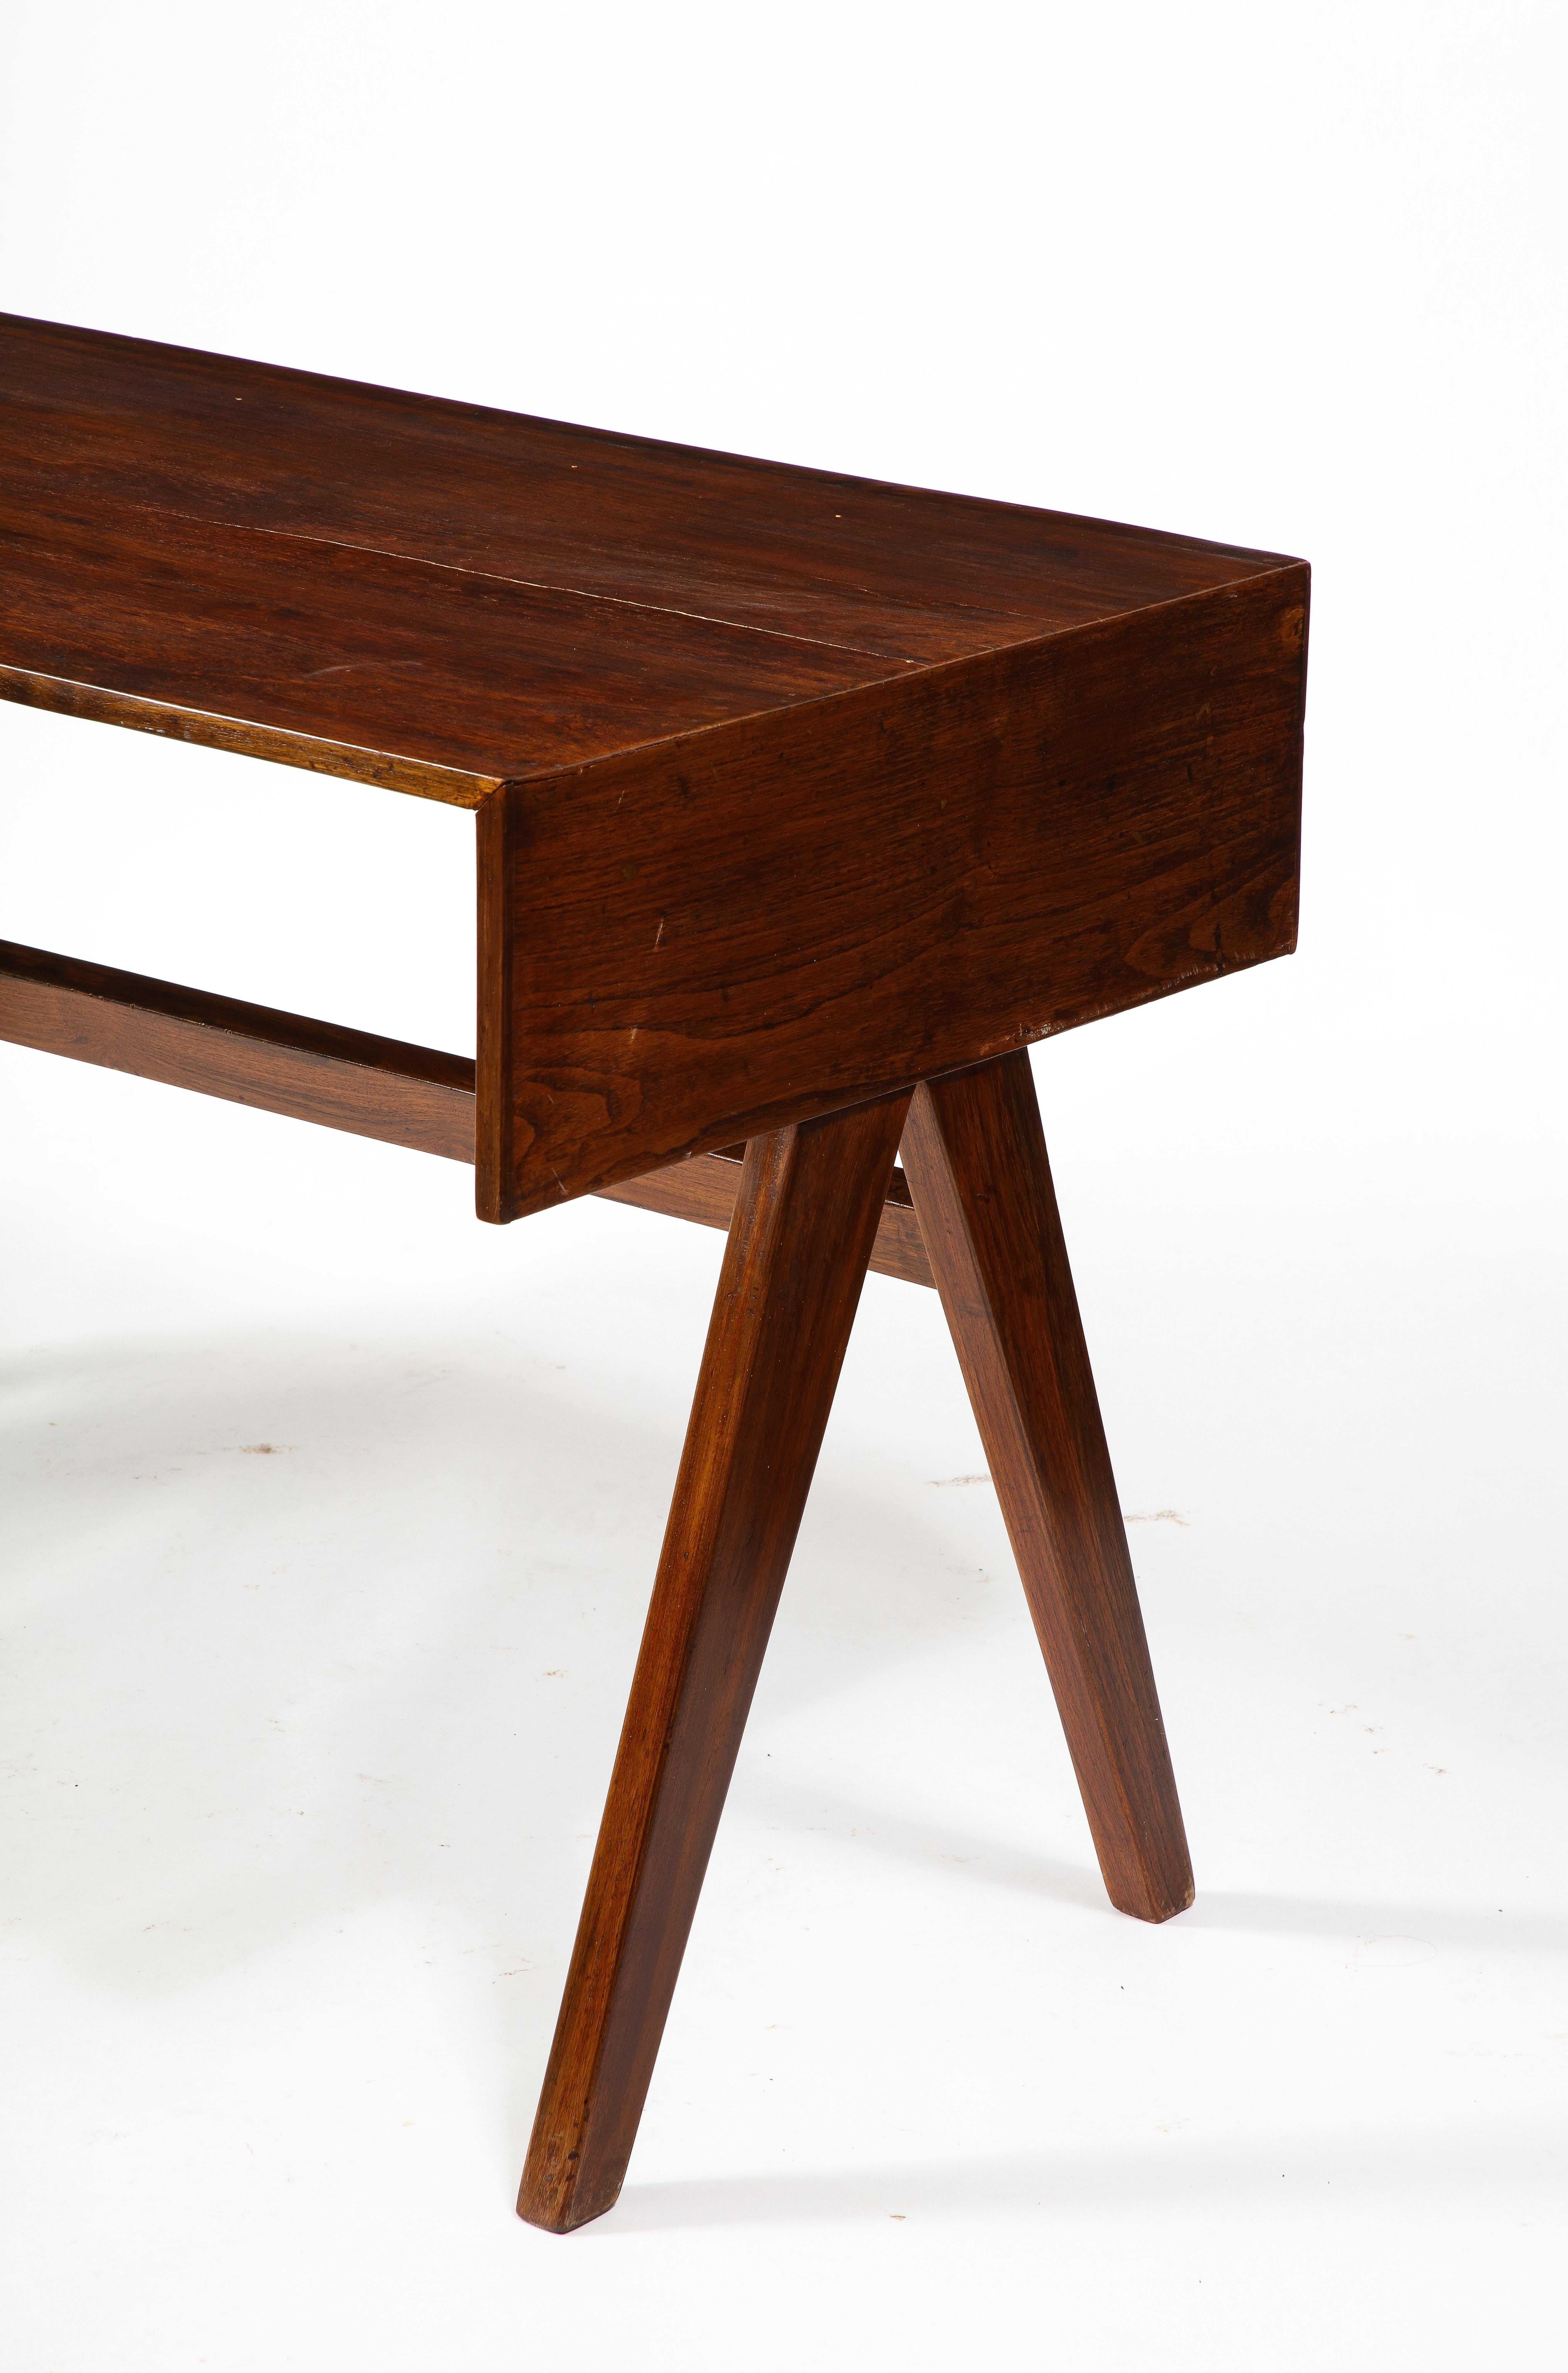 Pierre Jeanneret Style Mid-Century 'Student' Compass Desk, India 1960's For Sale 3